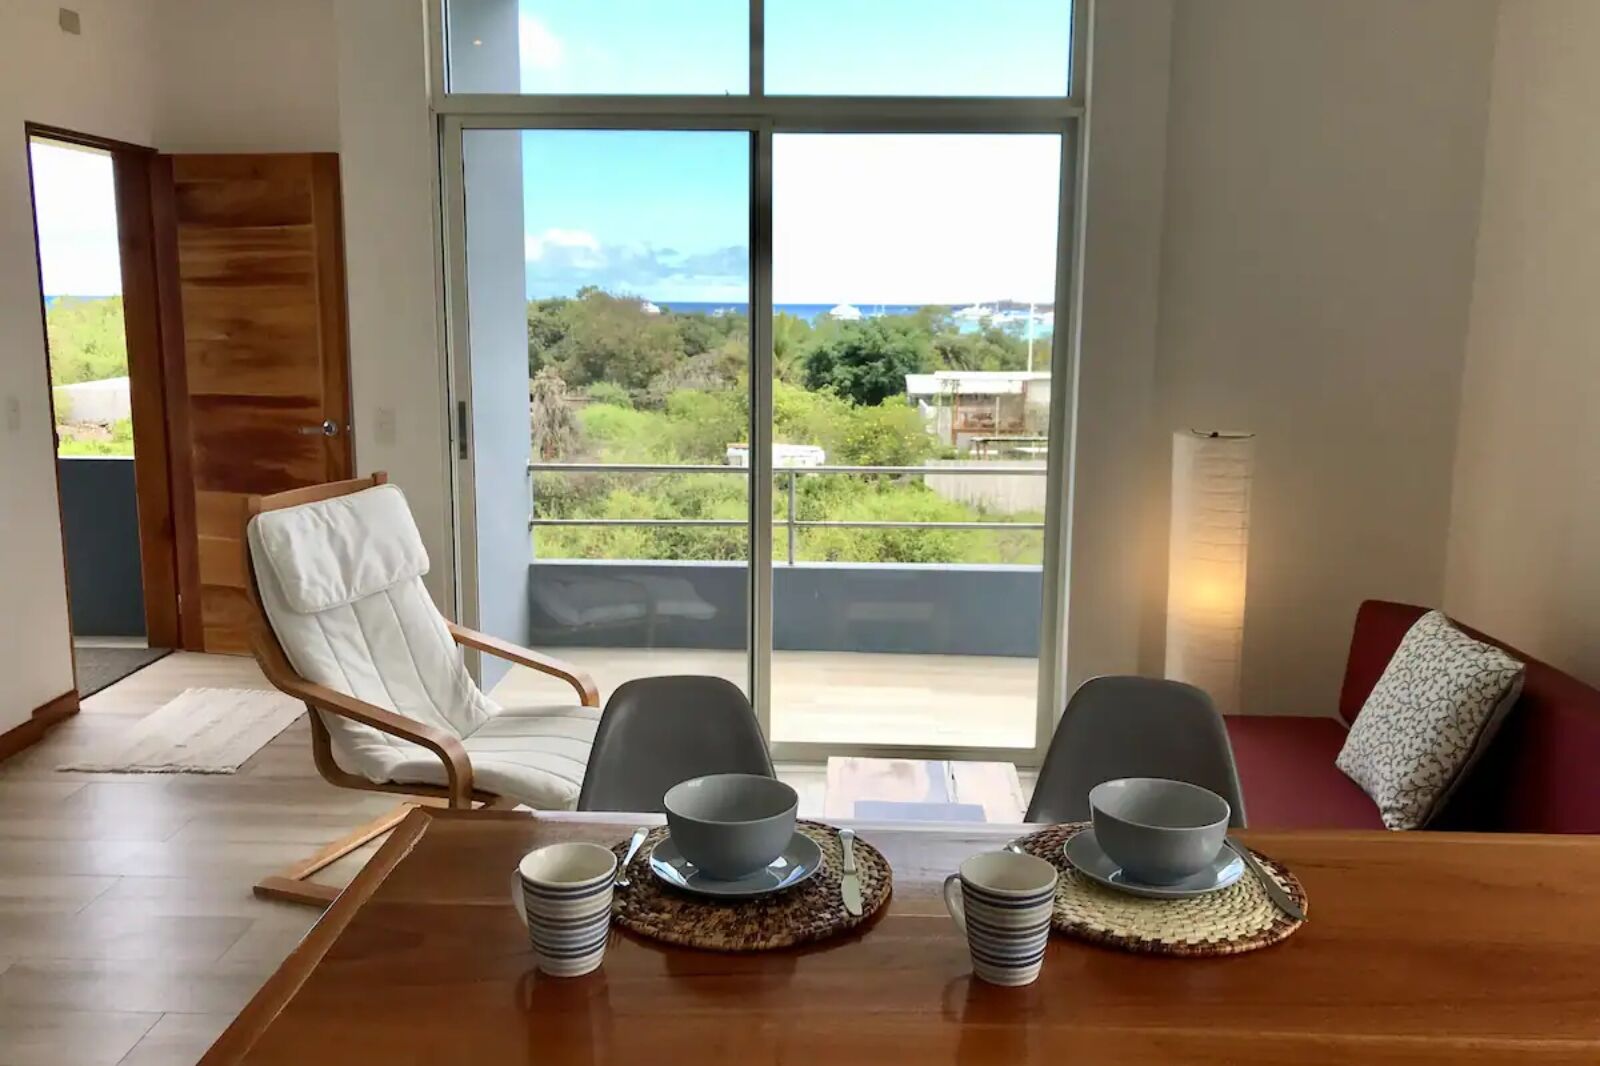 Living room and dining area in Airbnb Galapagos rental 